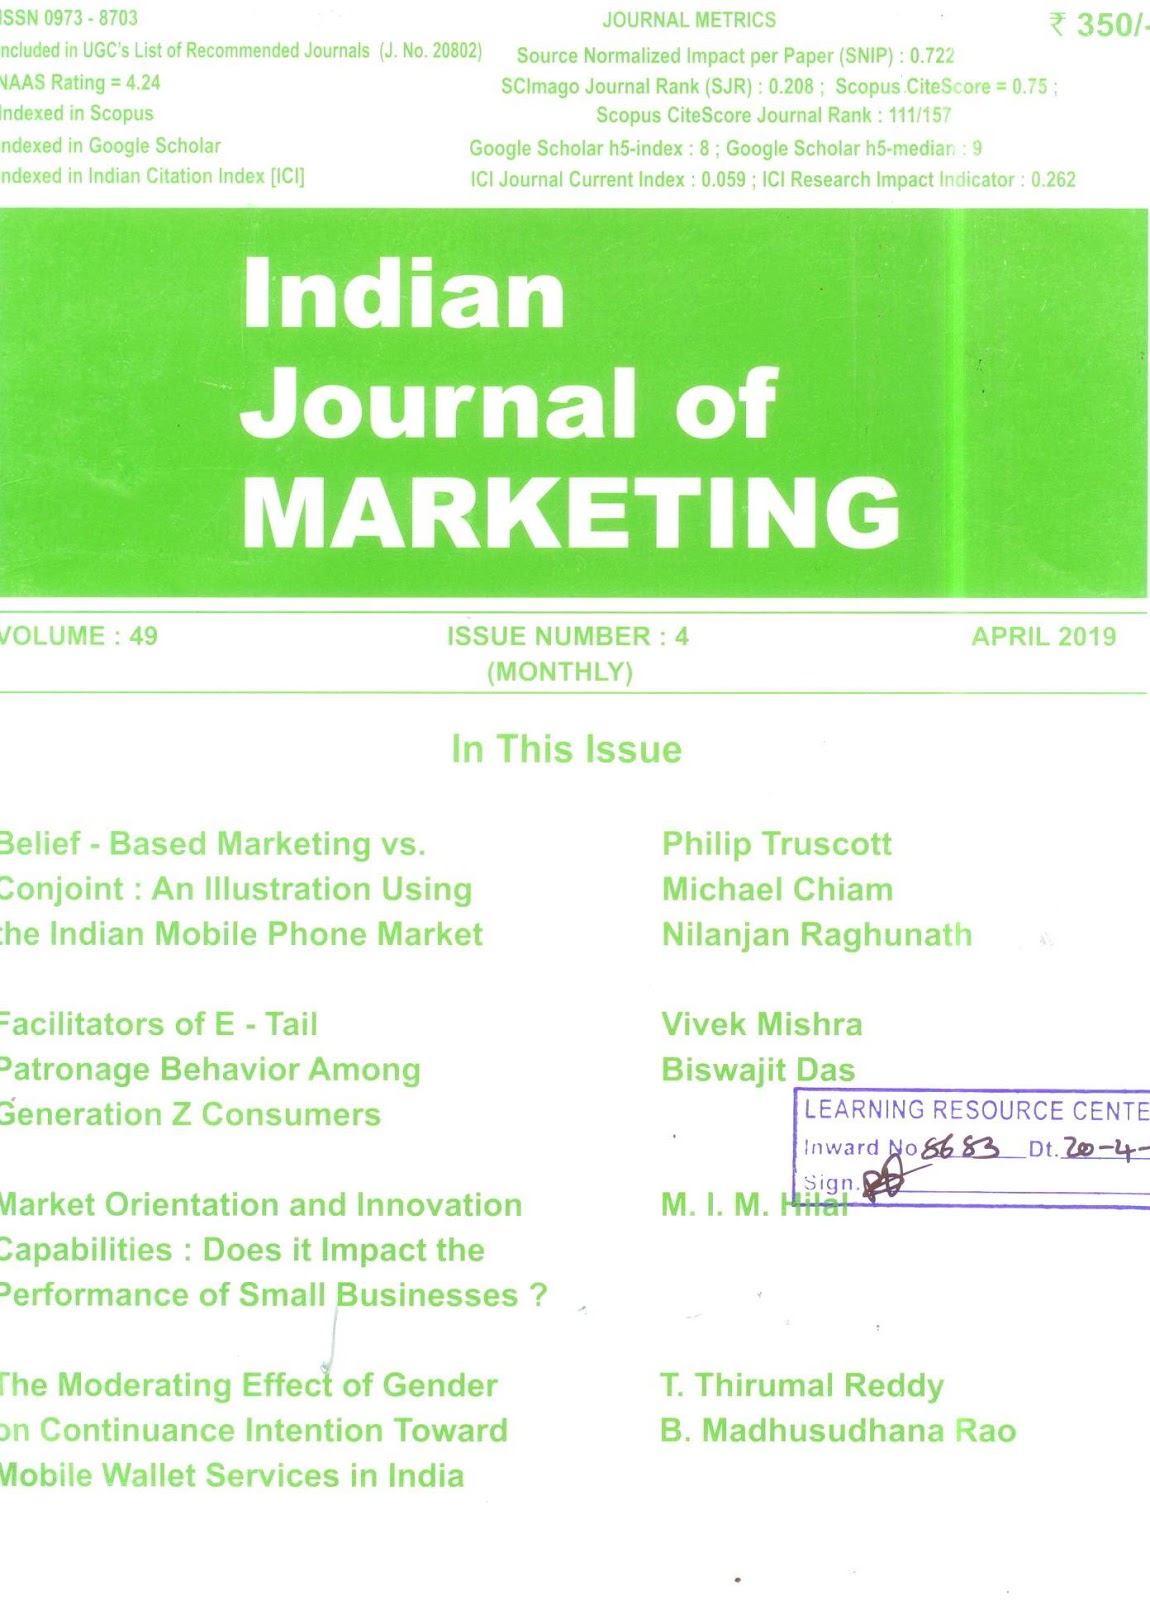 http://indianjournalofmarketing.com/index.php/ijom/issue/view/8431